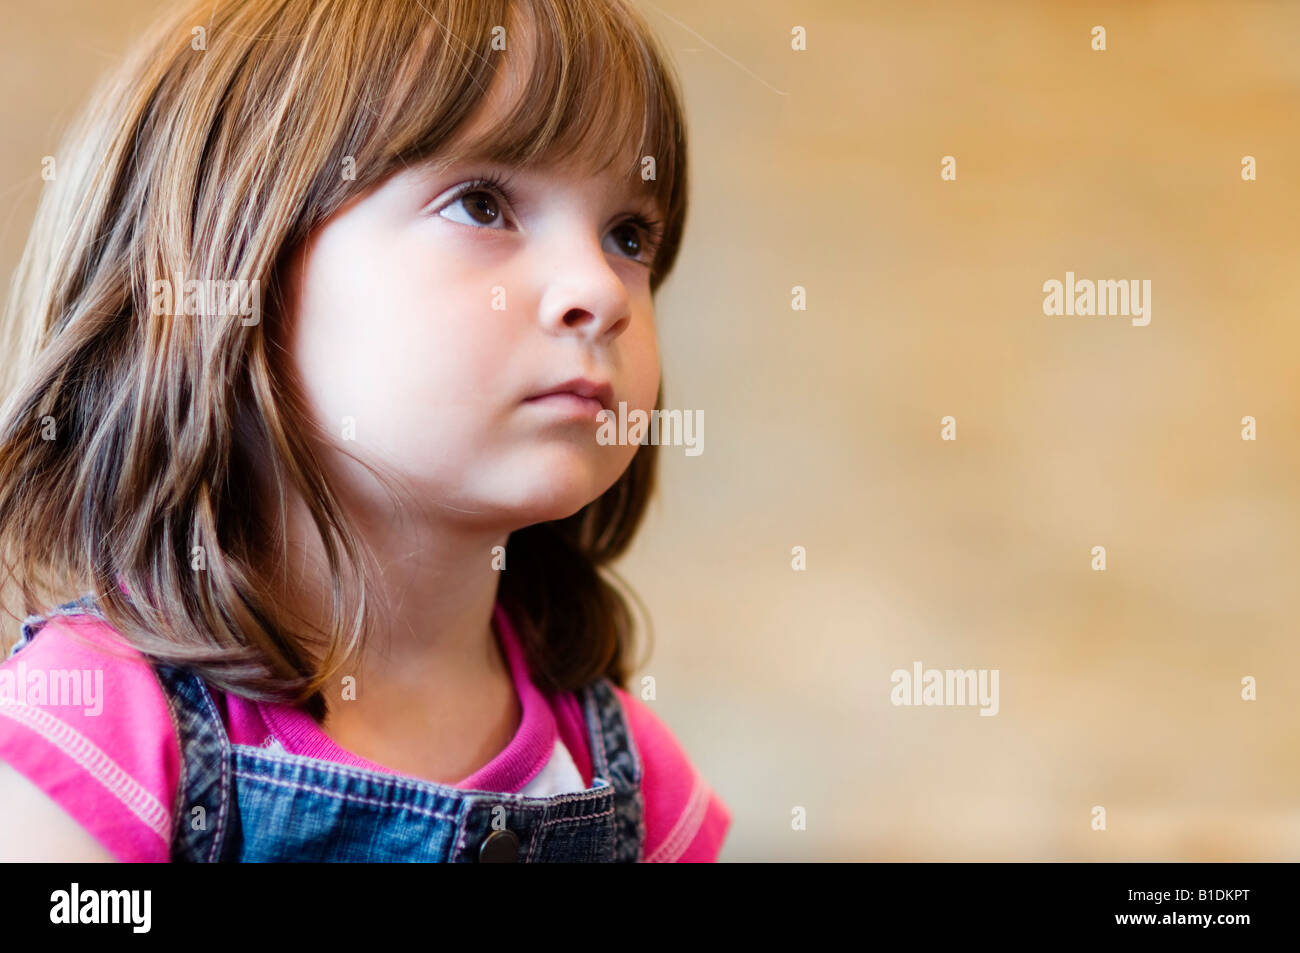 Child looking up at teacher, listening with interest and curiosity. Stock Photo